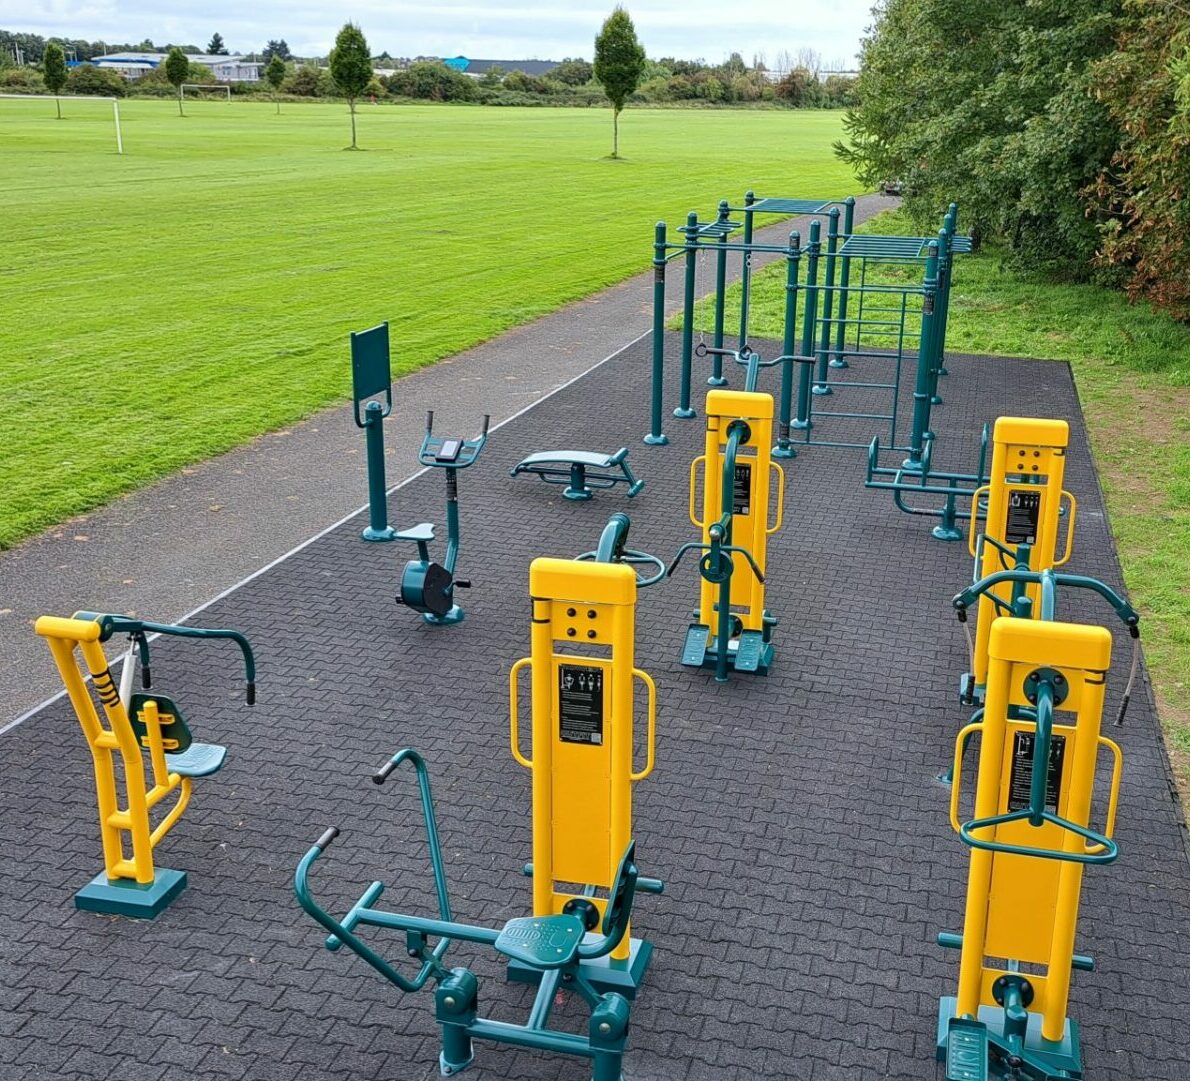 Choosing the Right Outdoor Gym Equipment for Your Sports Club